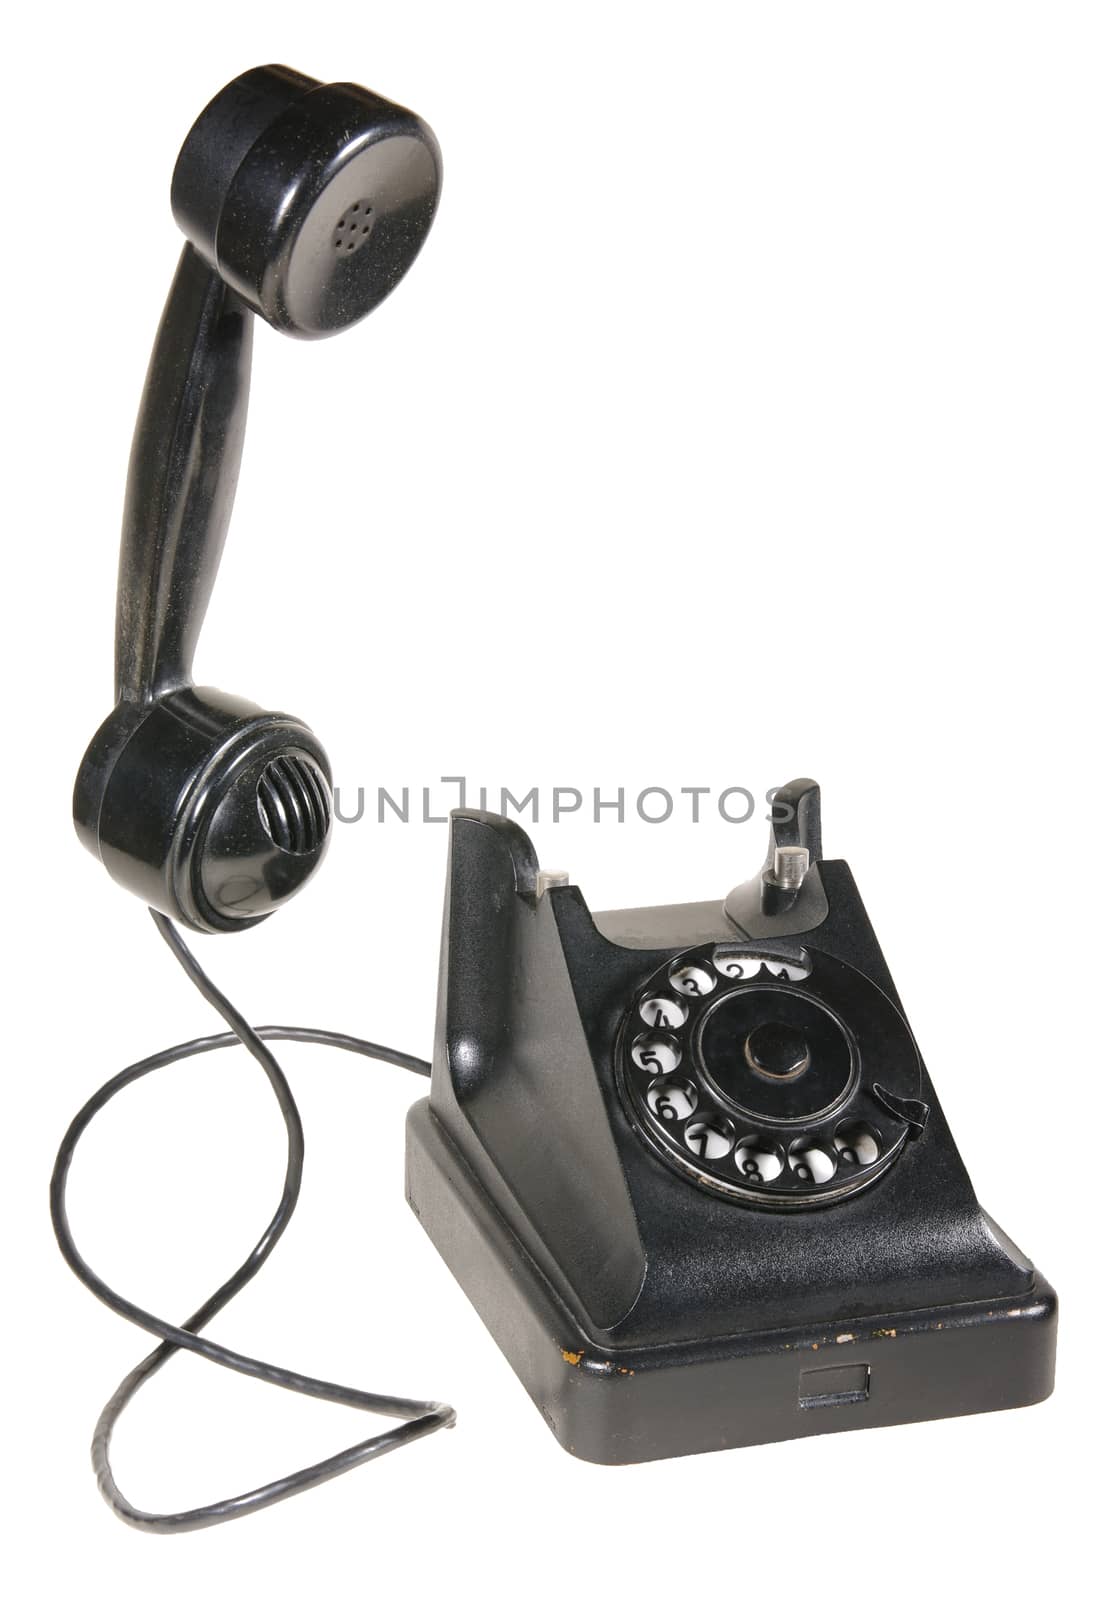 Telephone 1950 - 1960 period. Made of plastic. In many cases, the color was black